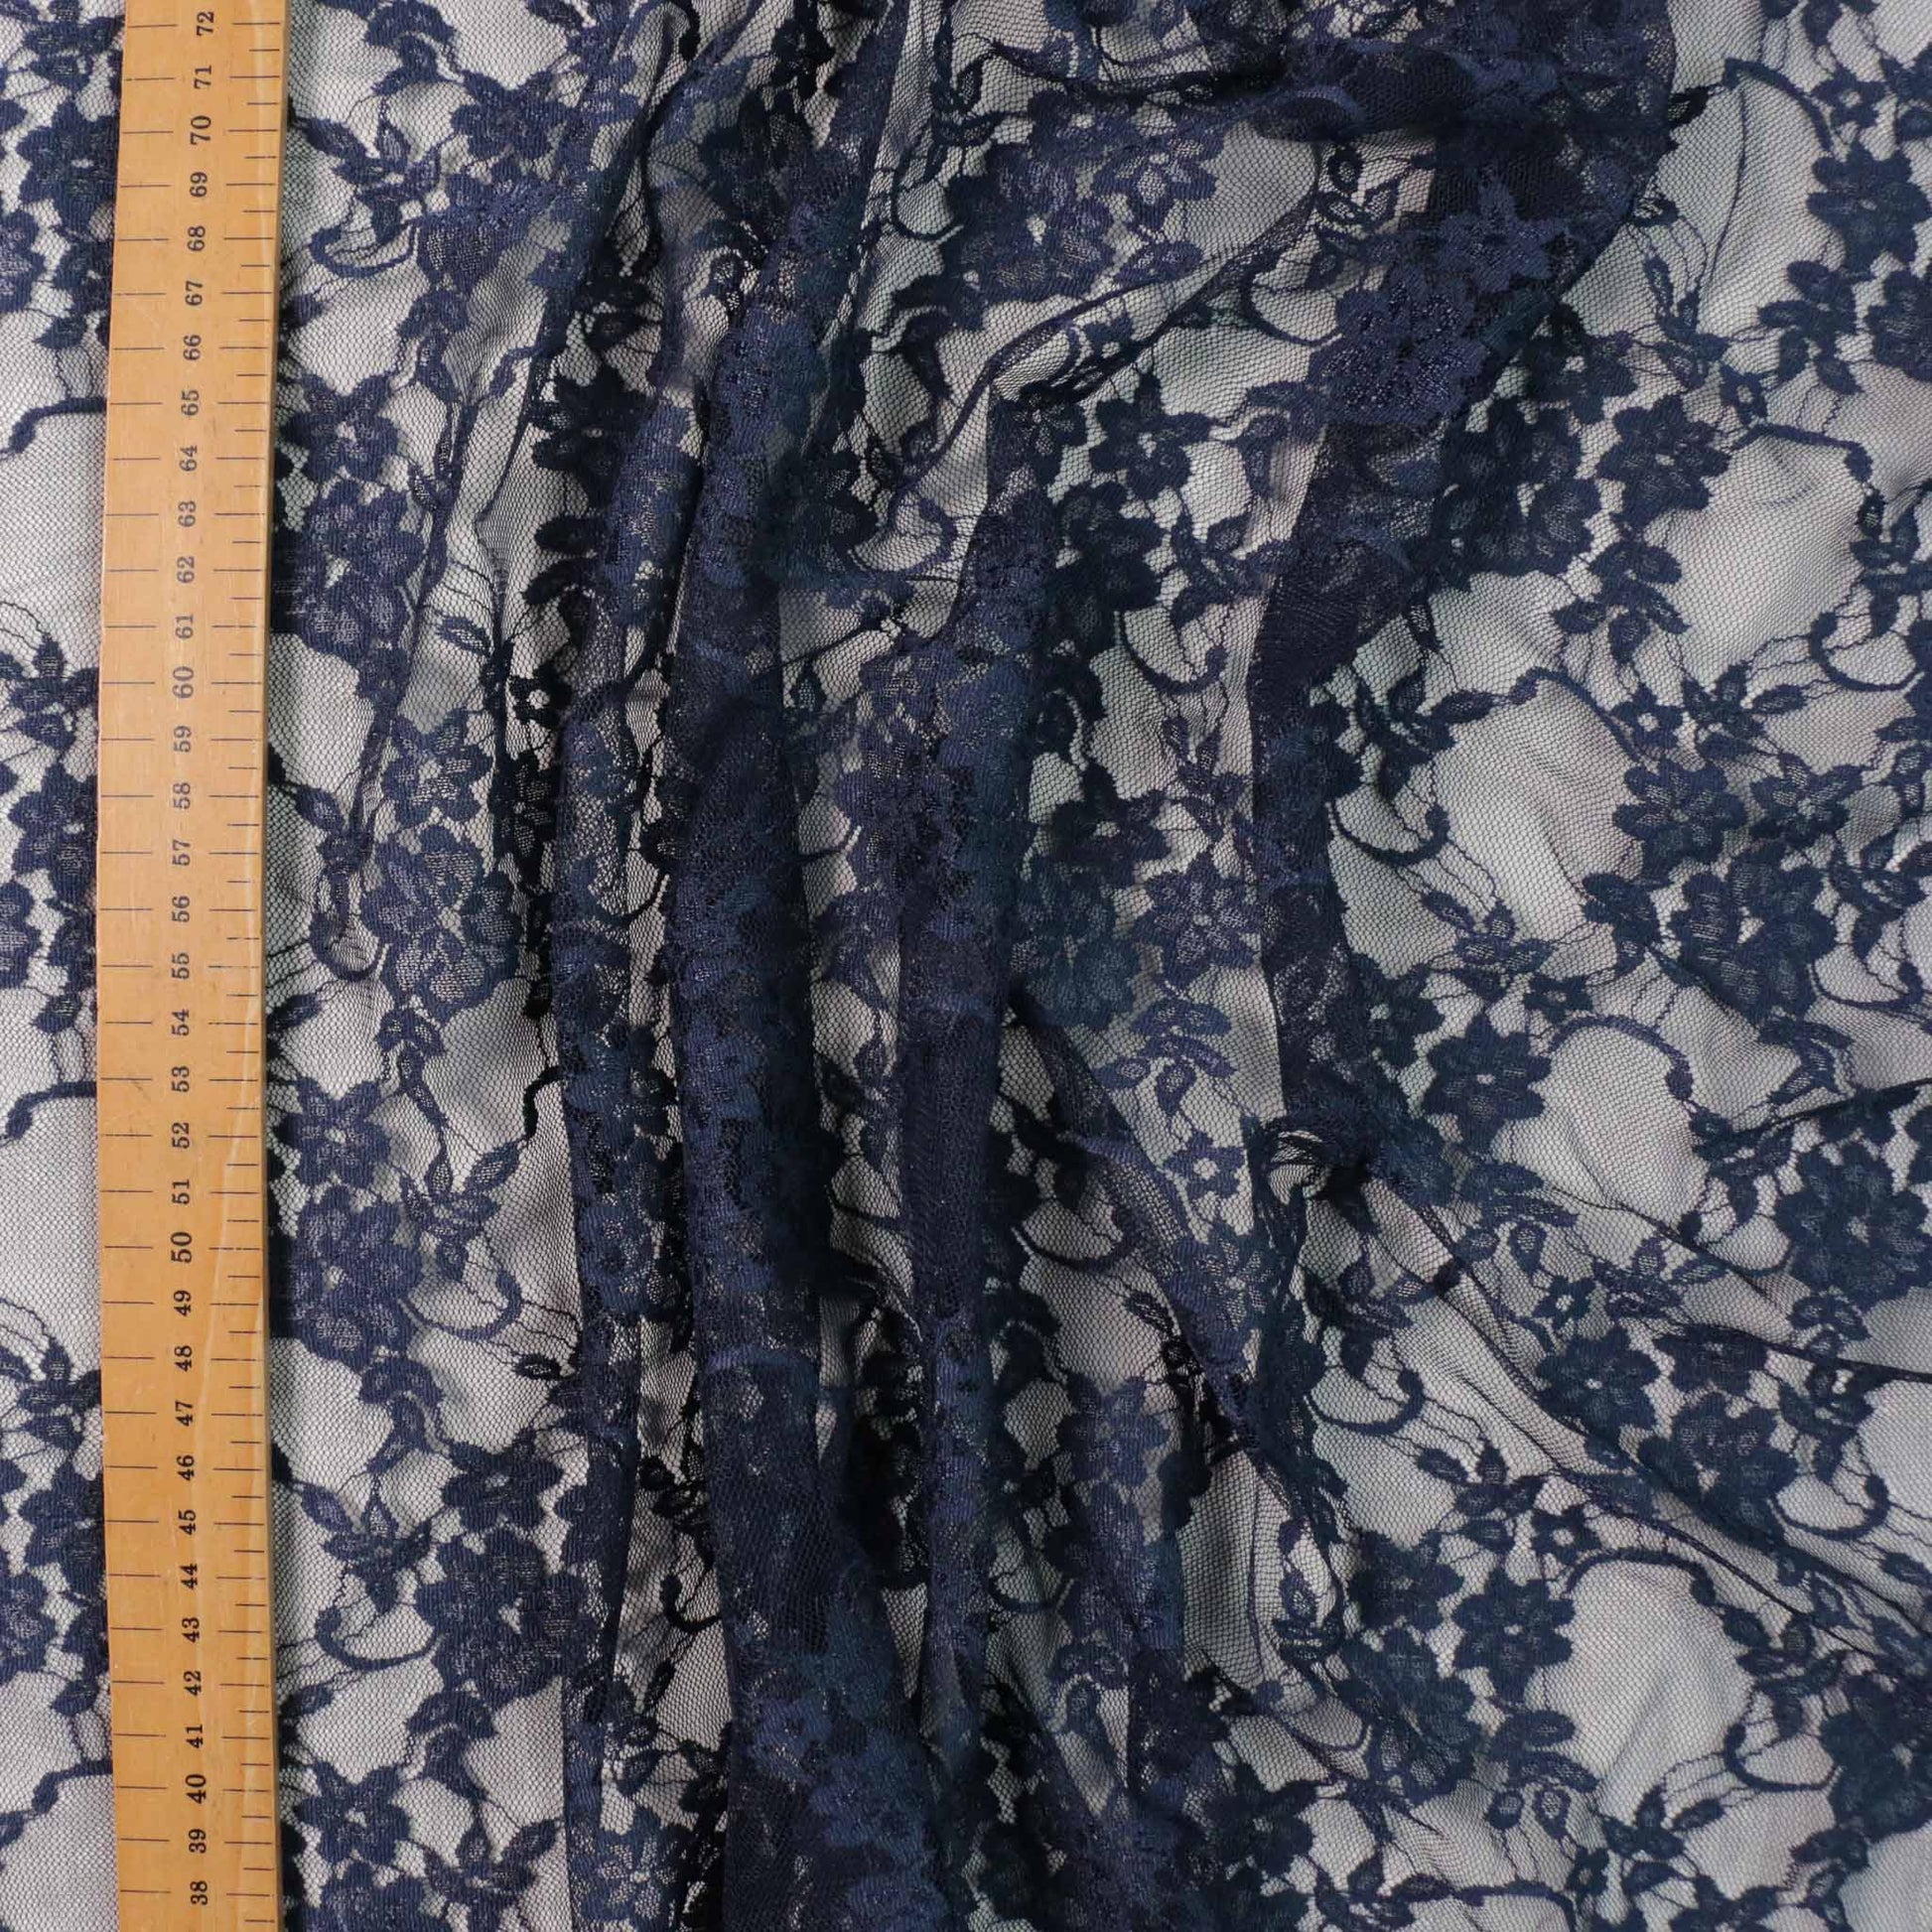 metre lace fabric with floral design in navy blue colour